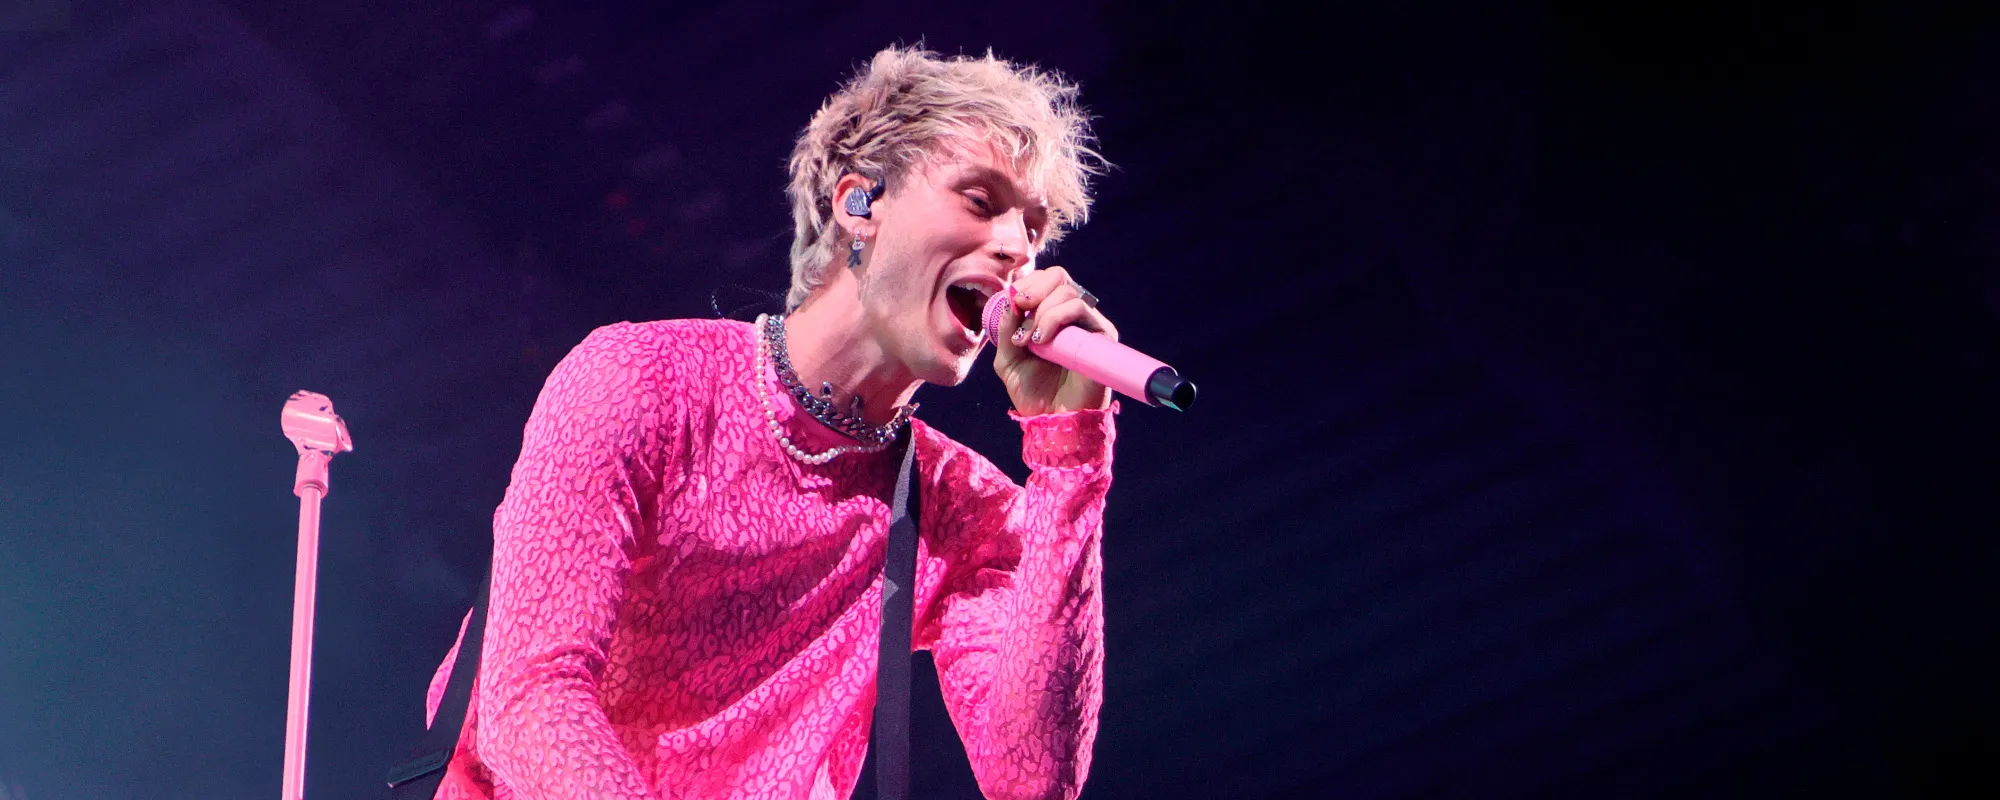 The 10 Best Machine Gun Kelly Songs—From Rapping About Cleveland to Pink Guitars